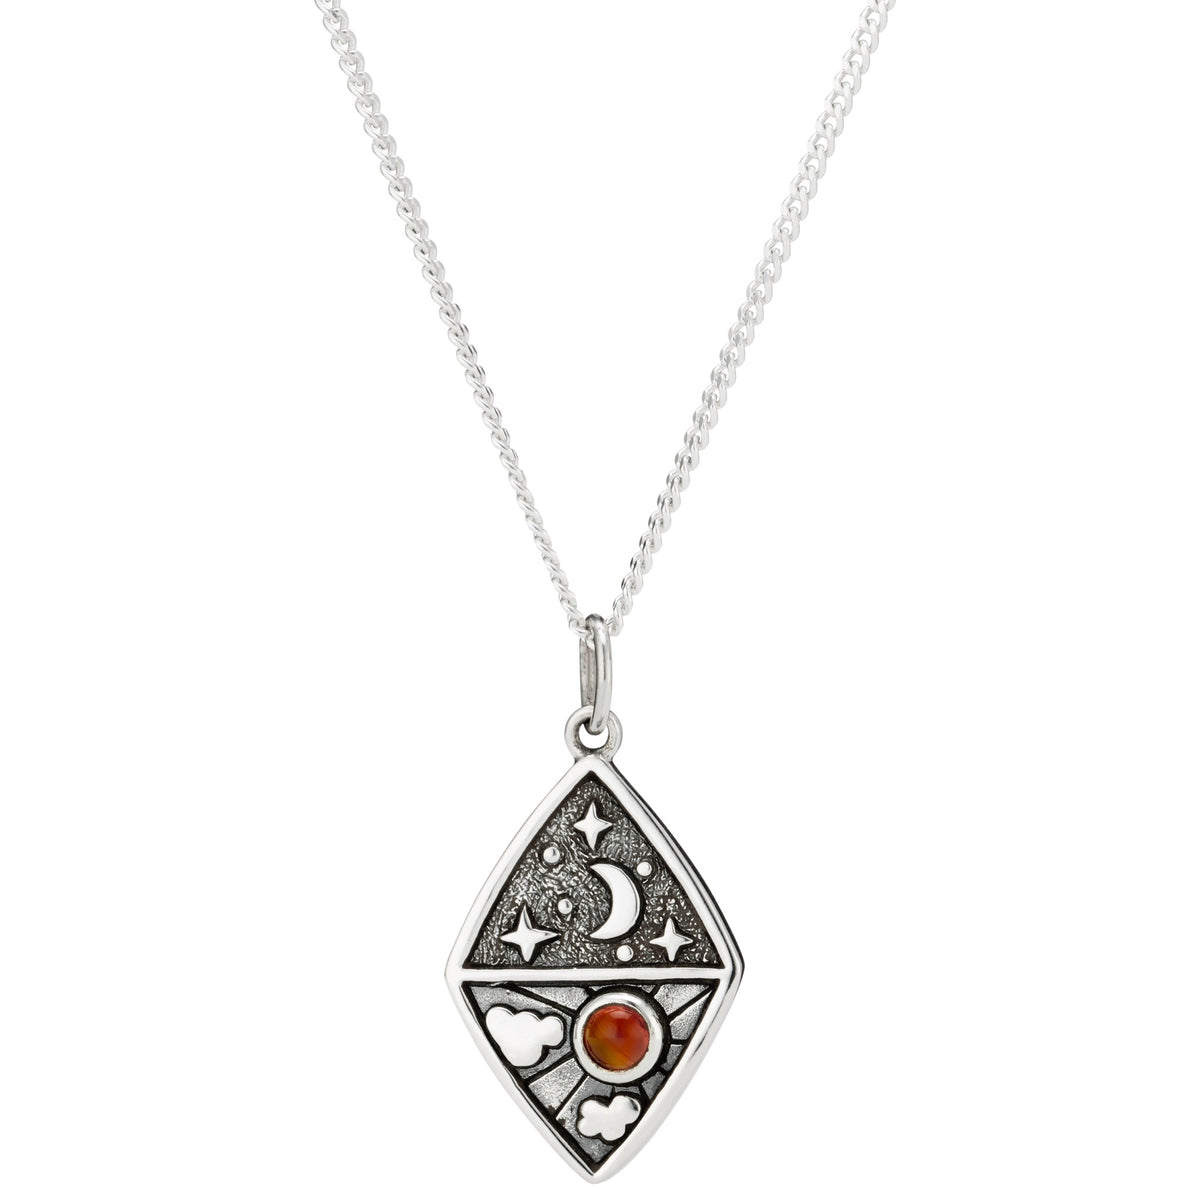 DAWN TO DUSK - Sterling Silver & Carnelian Necklace